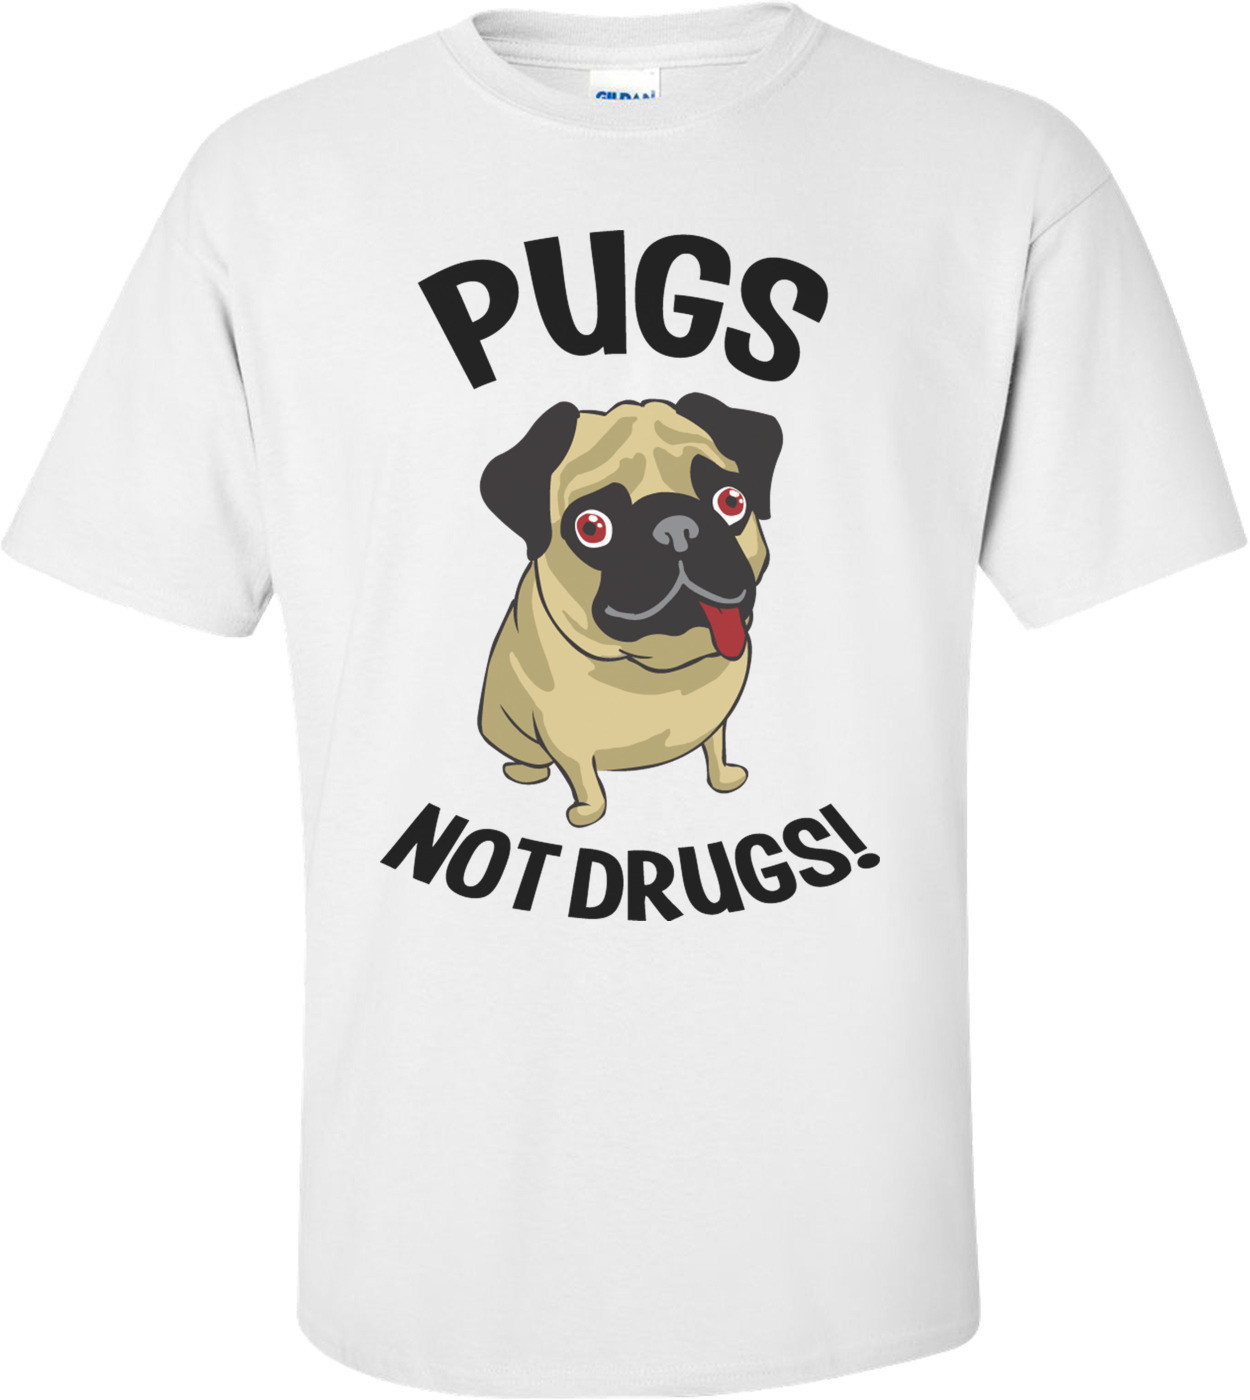 Pugs Not Drugs Funny